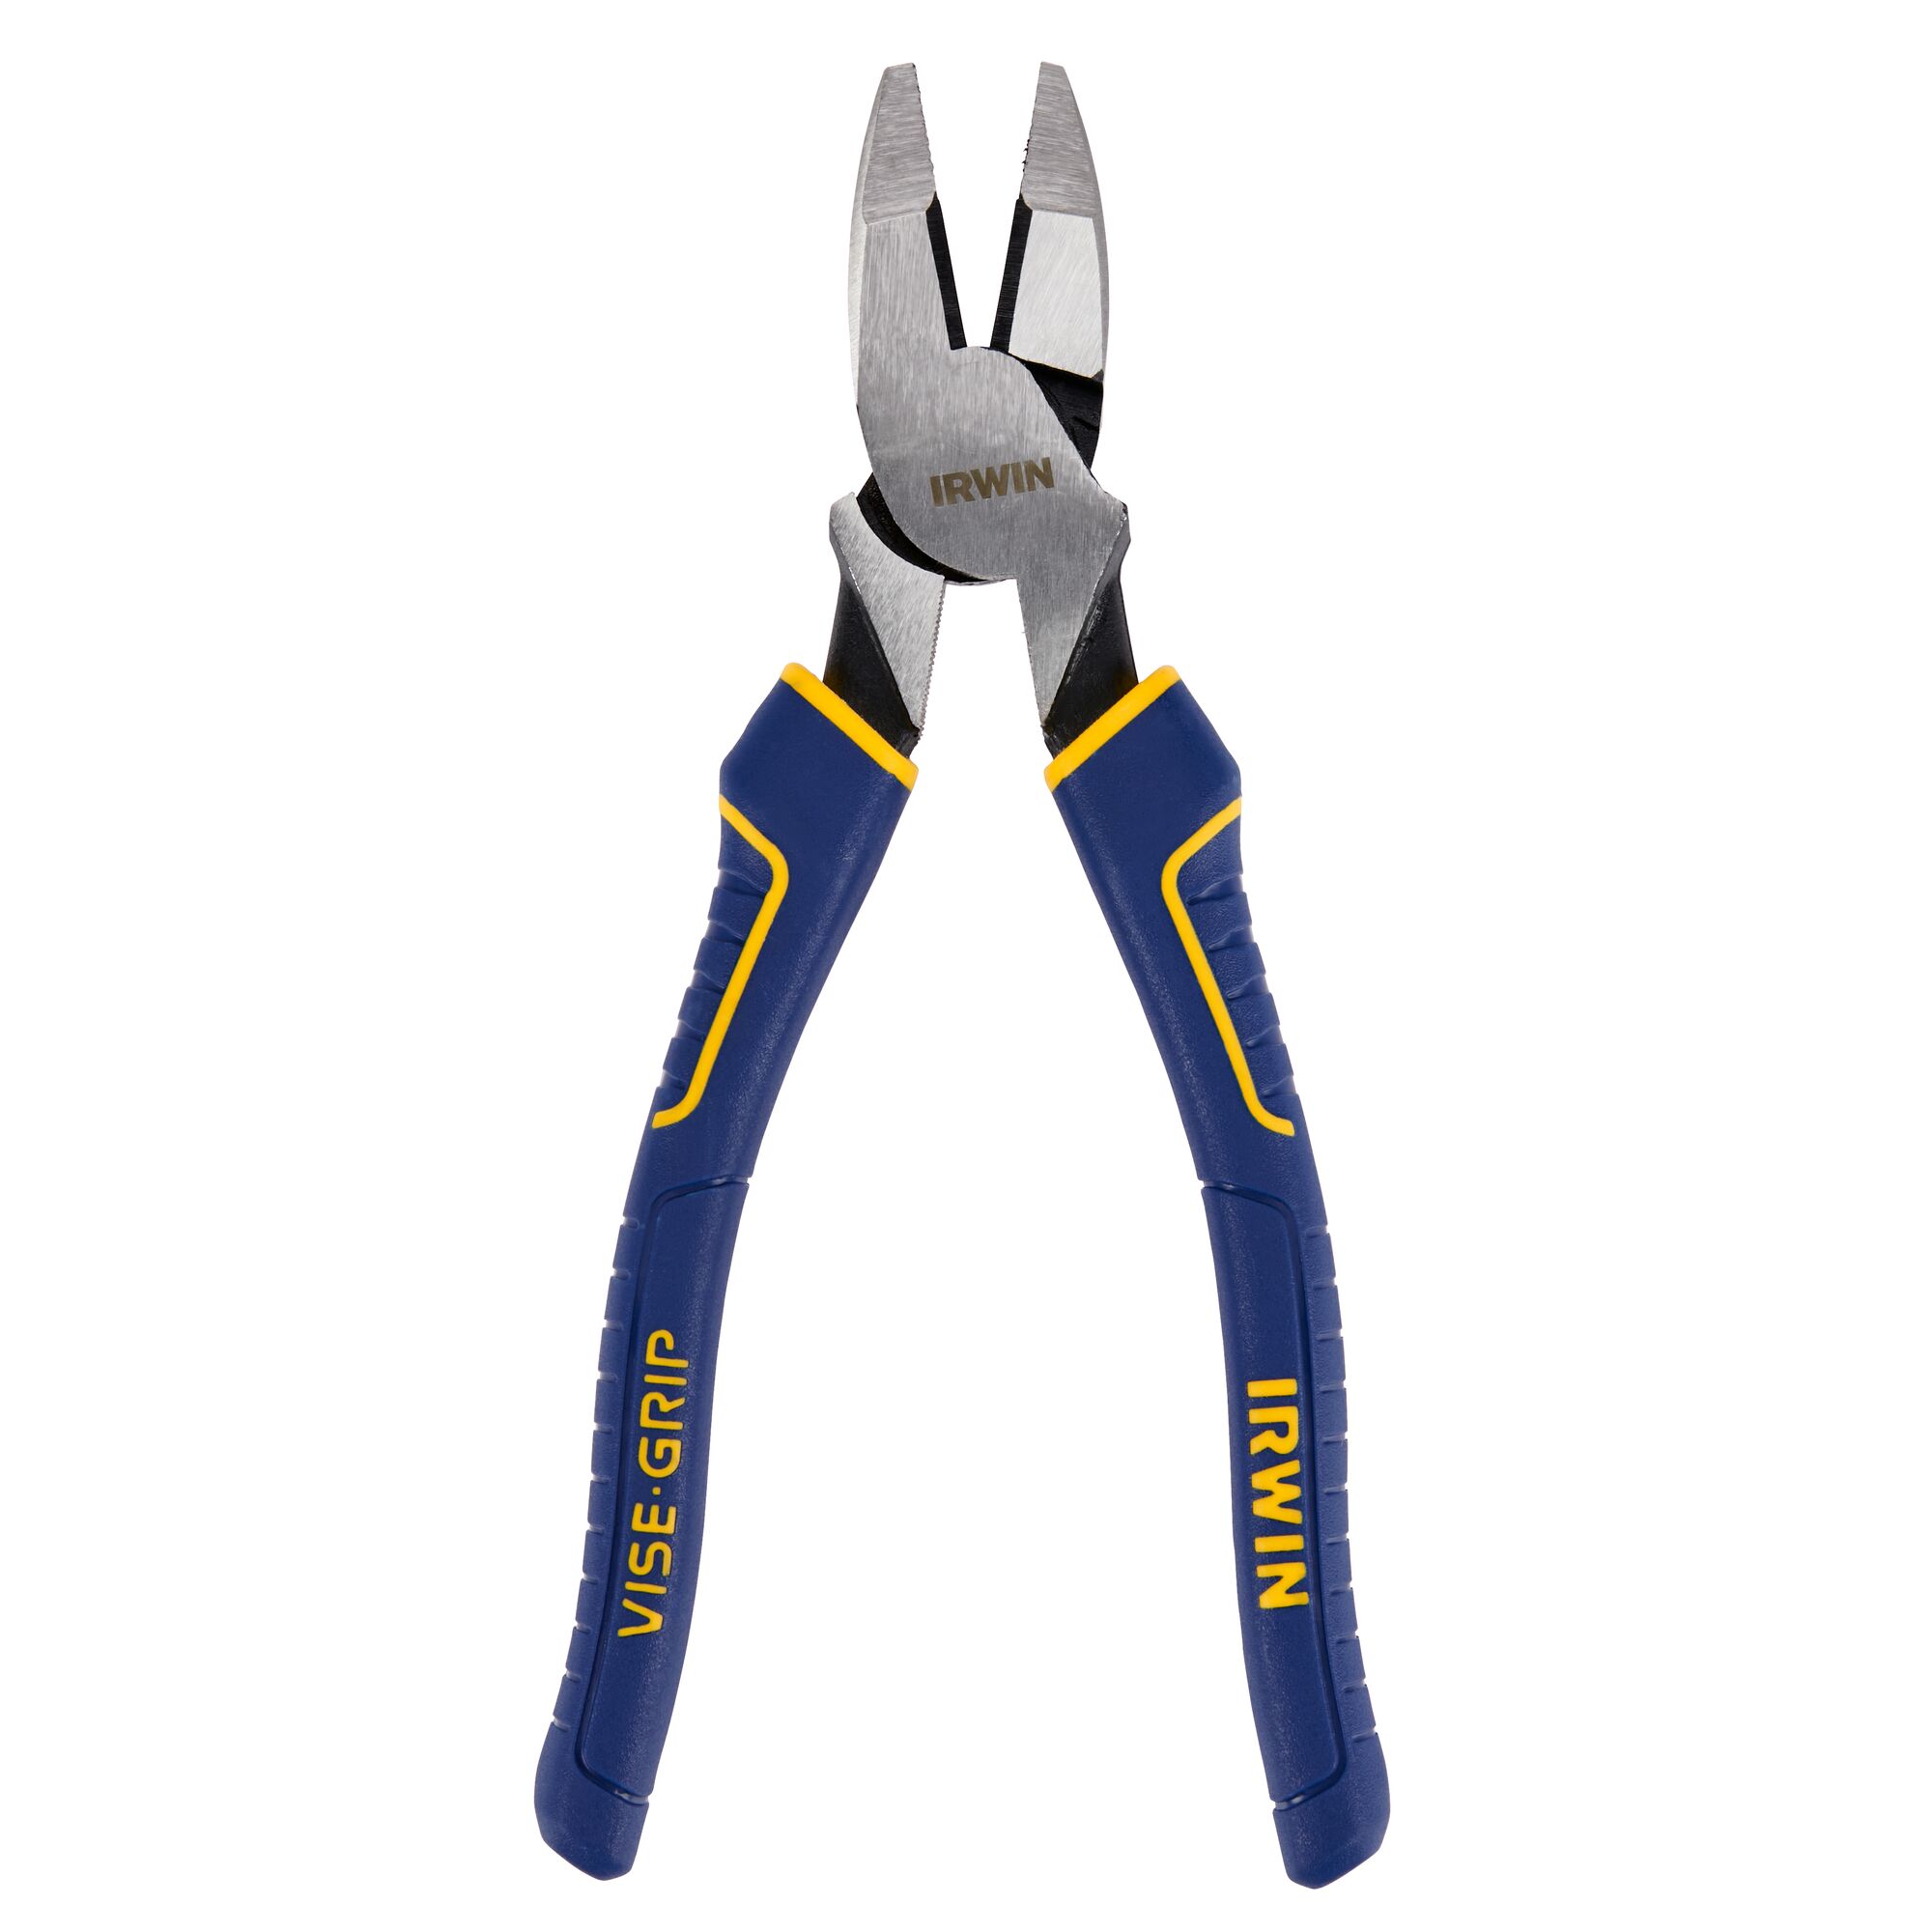 Locking Pliers Set: Curved/Flat/Long Nose, 1 1/8 in_1 1/2 in_1 3/4 in_1 7/8  in_2 in Max Jaw Opening